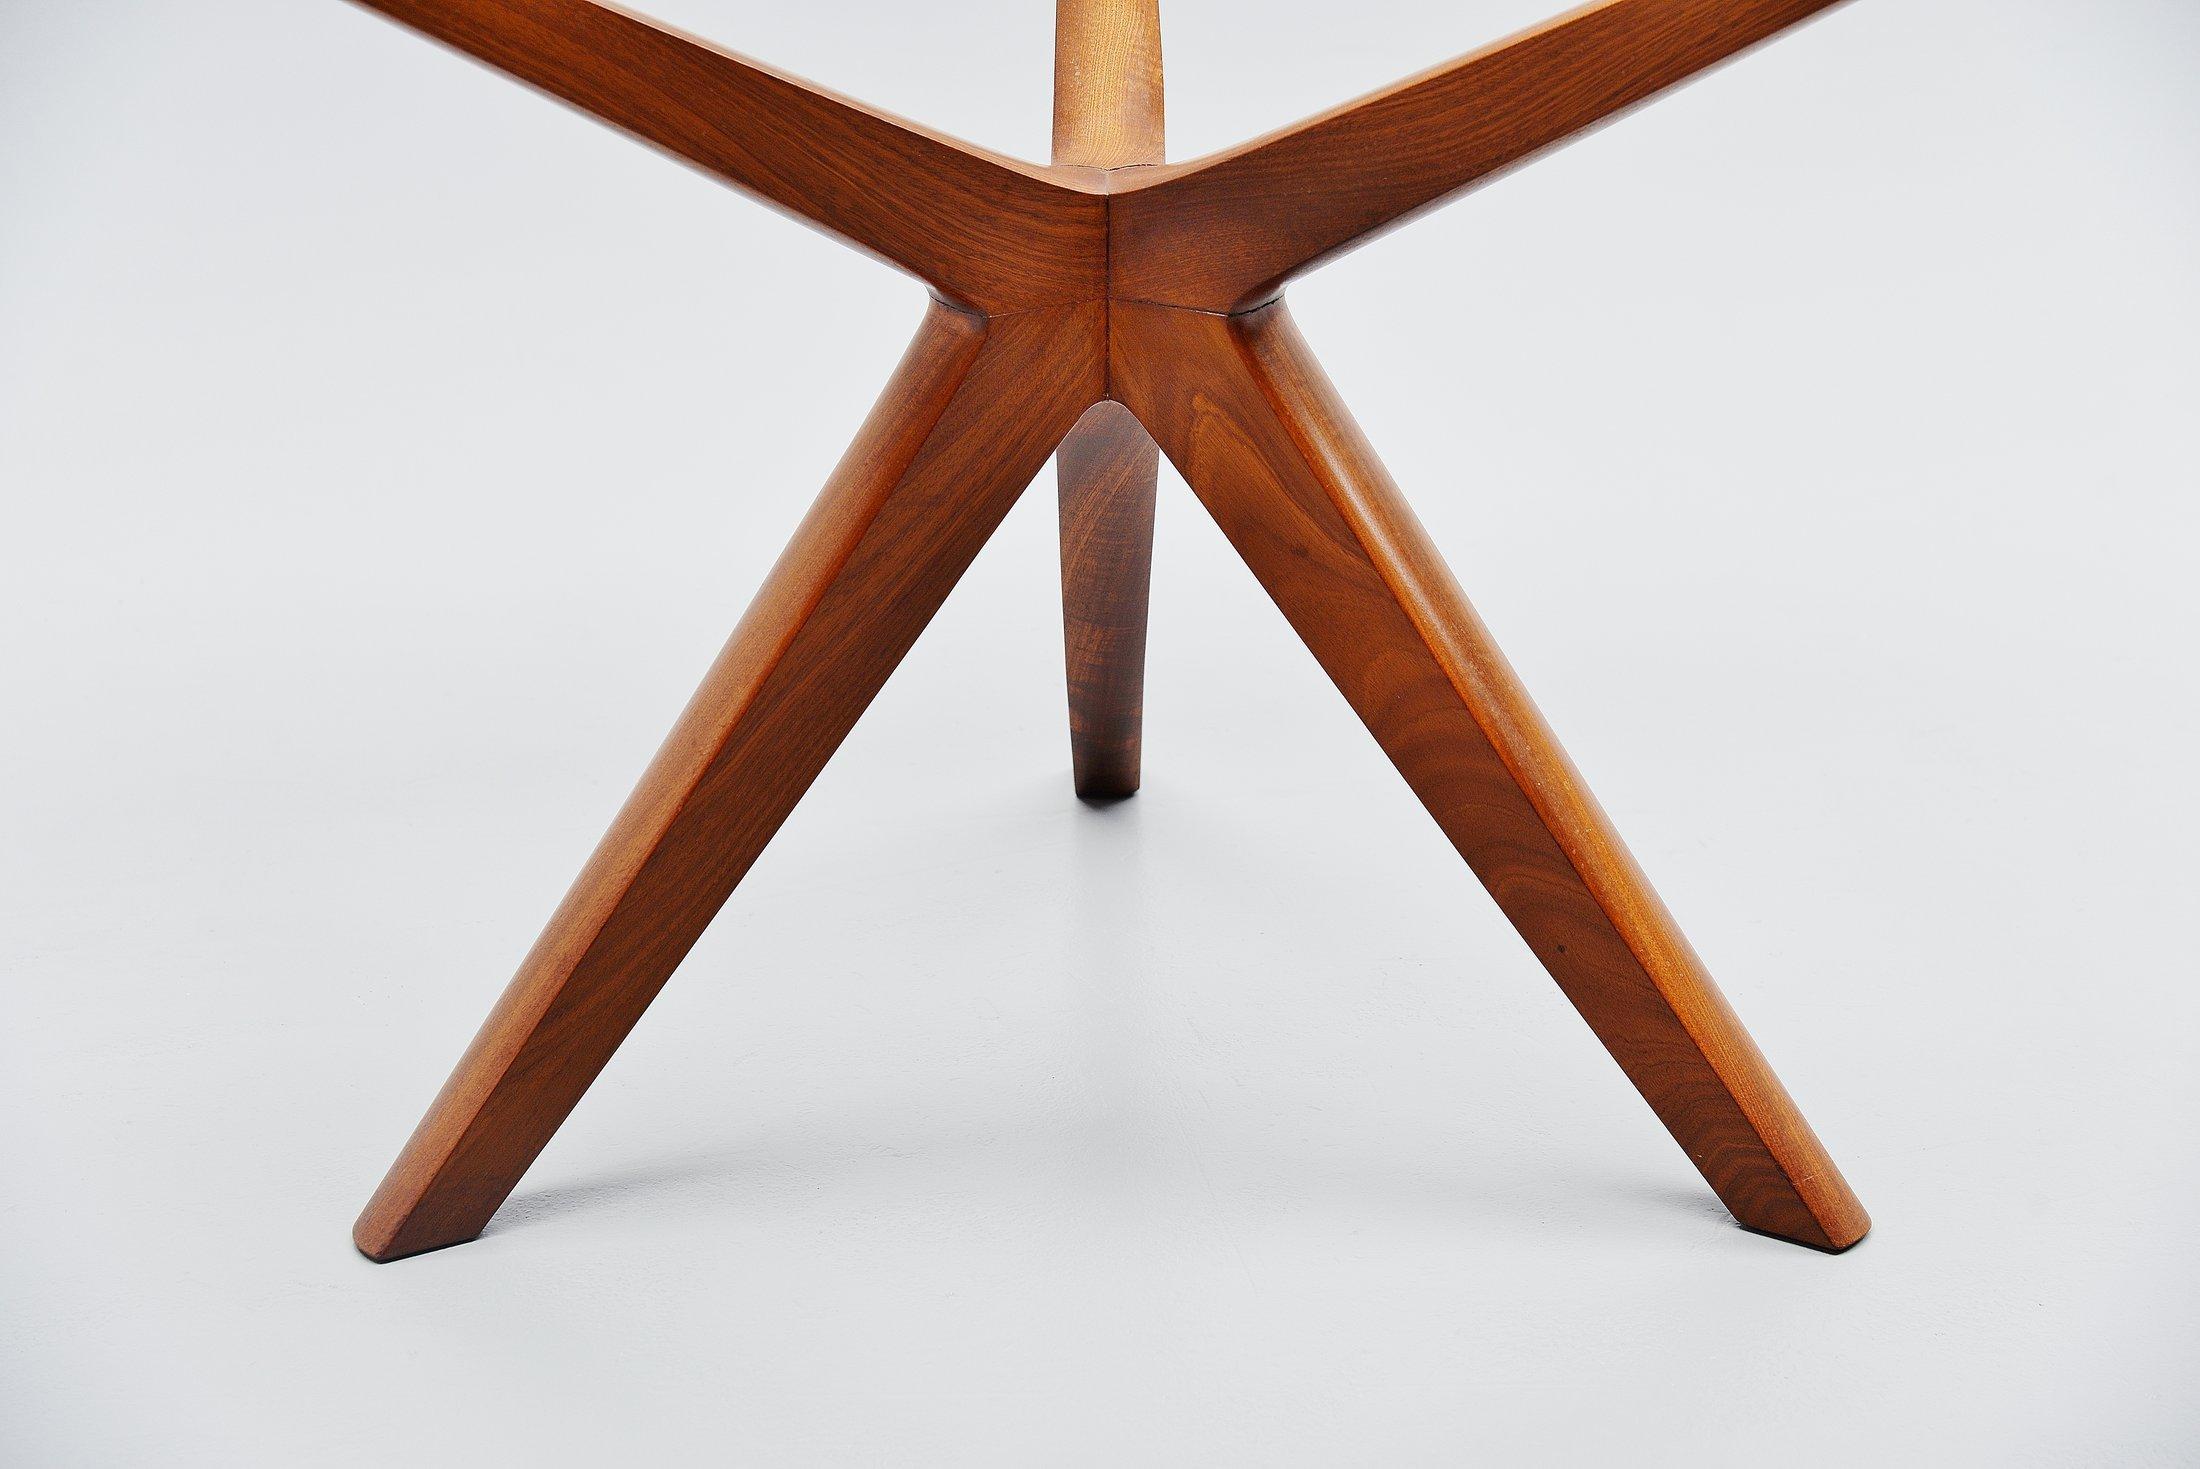 Stunning tripod dining table attributed to a design by Illum Wikkelso, produced in Denmark, 1960. The table is made of solid teak wood and has a glass top. The very nice tripod base looks powerful holding that ring where the glass is fixed. The